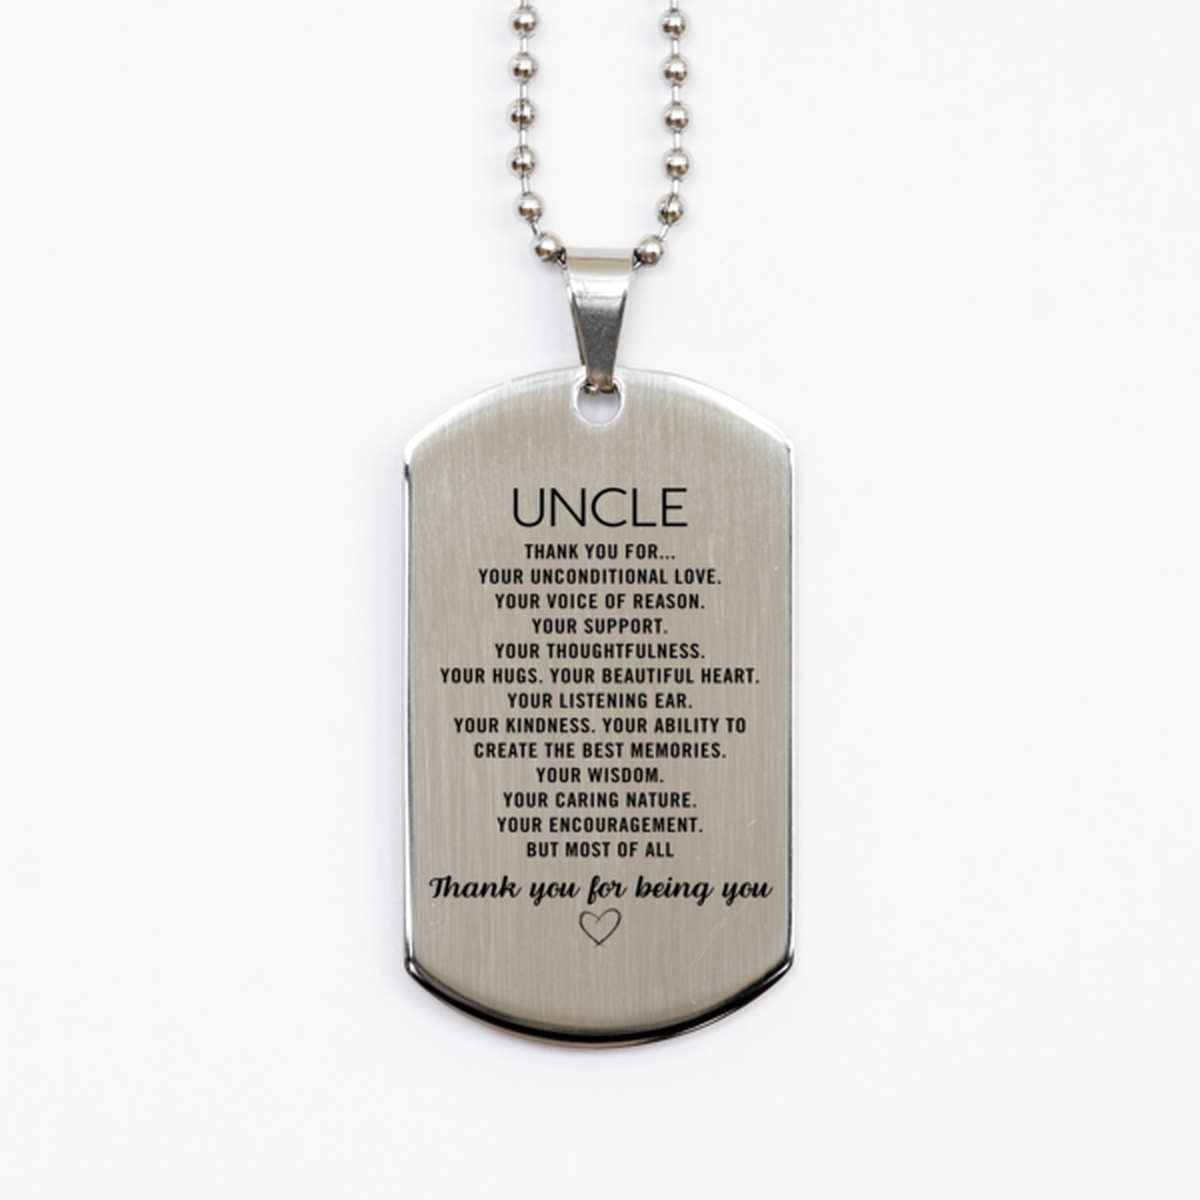 Uncle Silver Dog Tag Custom, Engraved Gifts For Uncle Christmas Graduation Birthday Gifts for Men Women Uncle Thank you for Your unconditional love